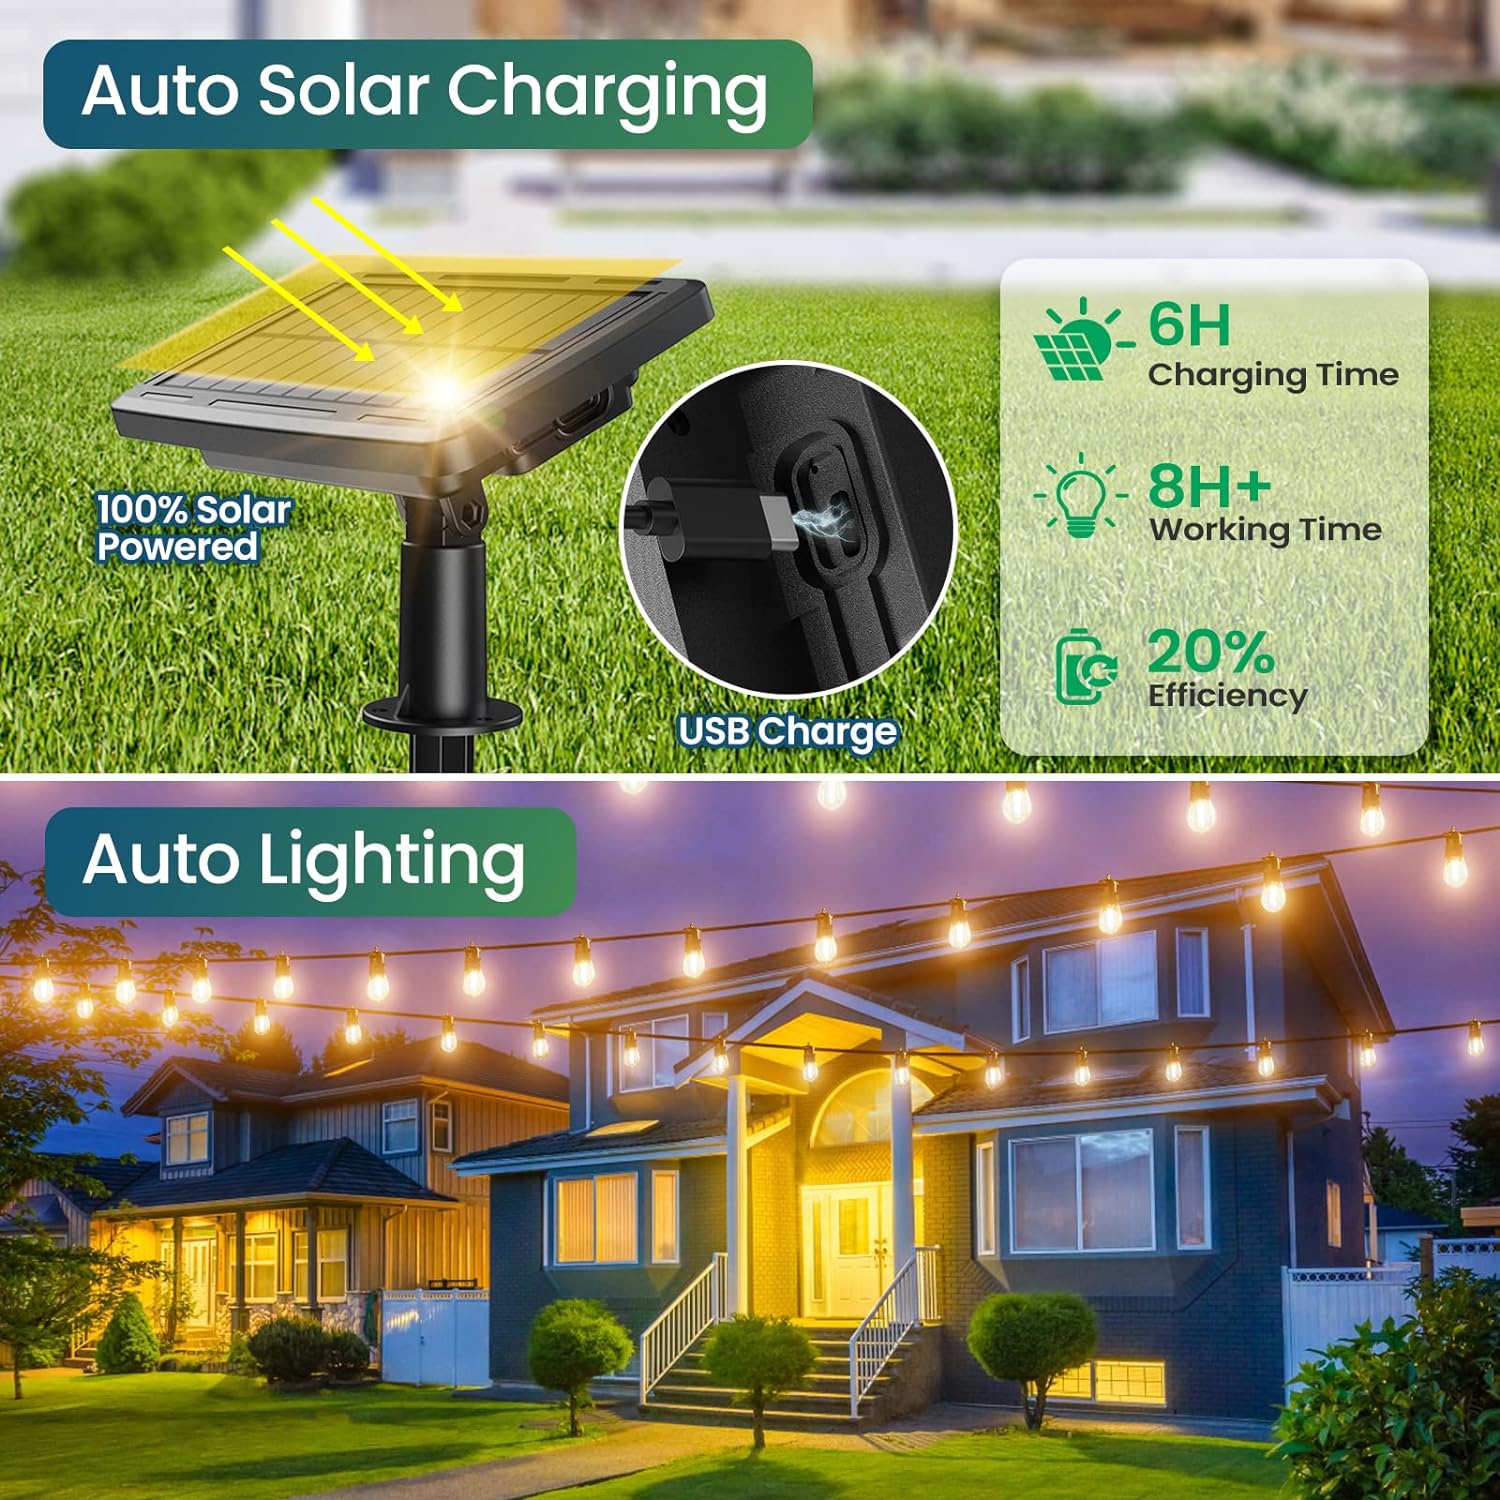 LED-Light-Strip-Outdoor-Solar-String-Lights-12-Bulbs-IP65-Waterproof-Outside-5M-Solar-Powered-Patio-String-Lights-with-4-Lighting-Modes-for-Backyard-Bistro-Party-Cafe-54